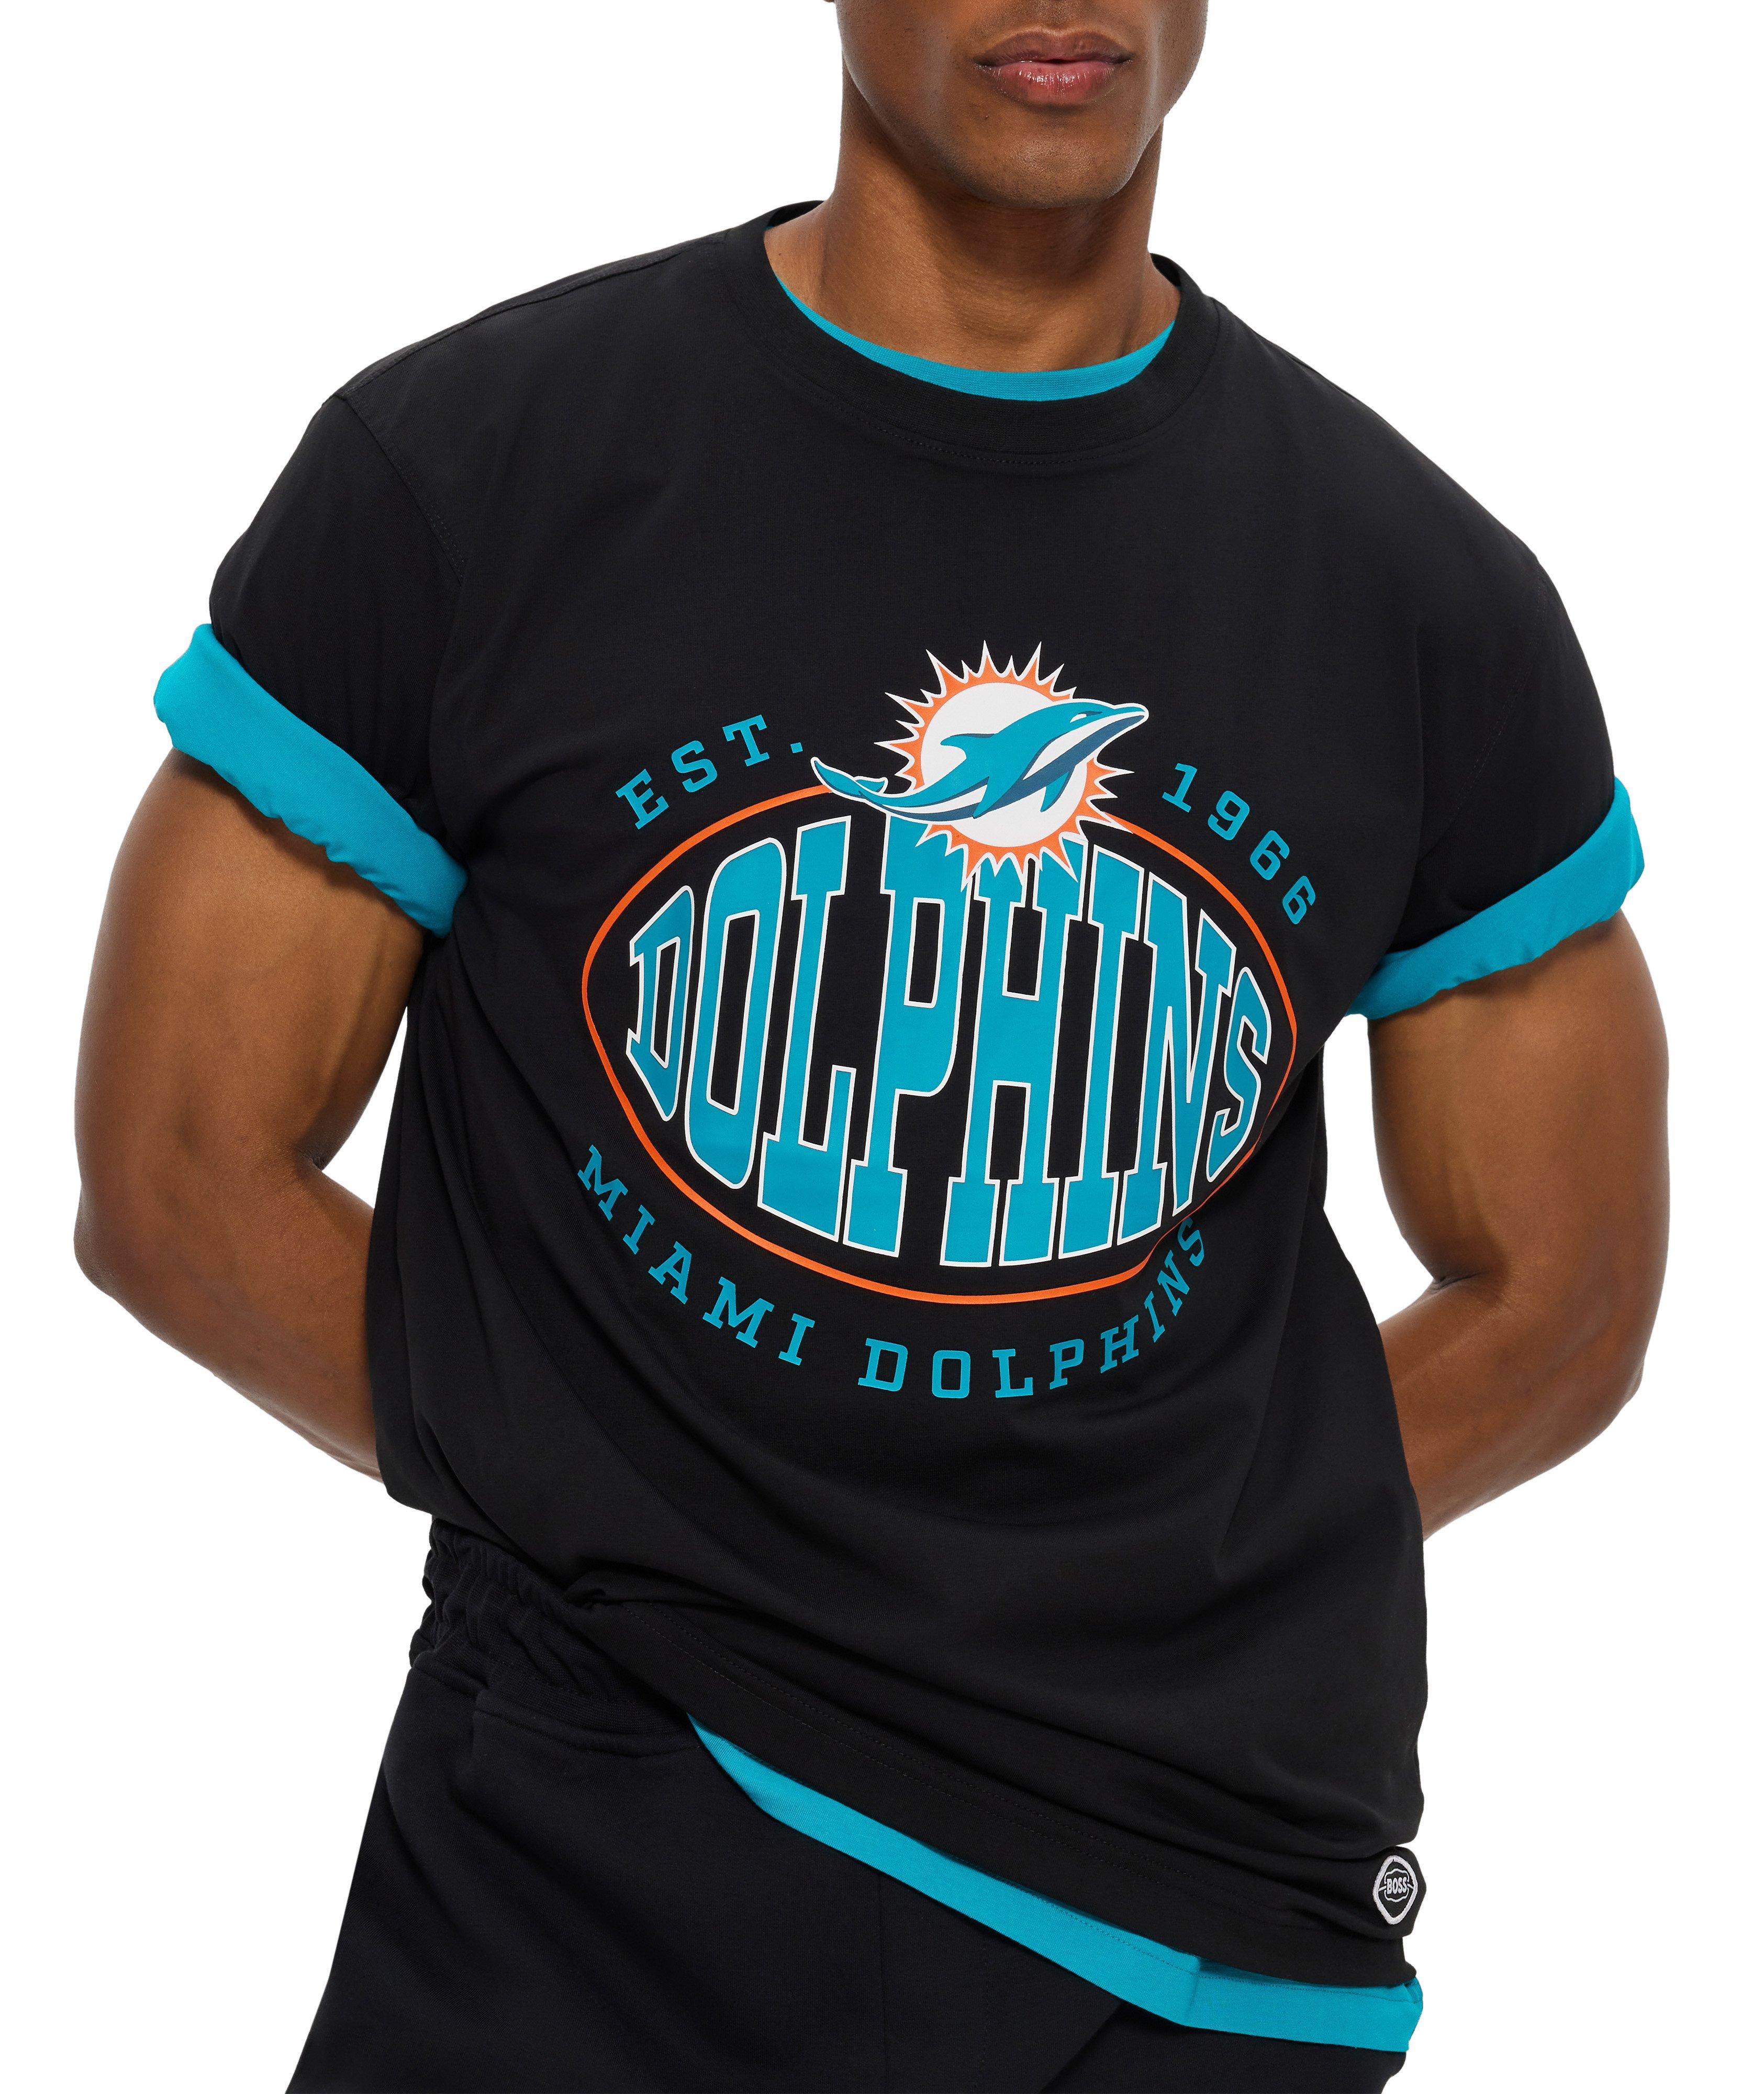 NFL Collection Miami Dolphins T-Shirt image 3